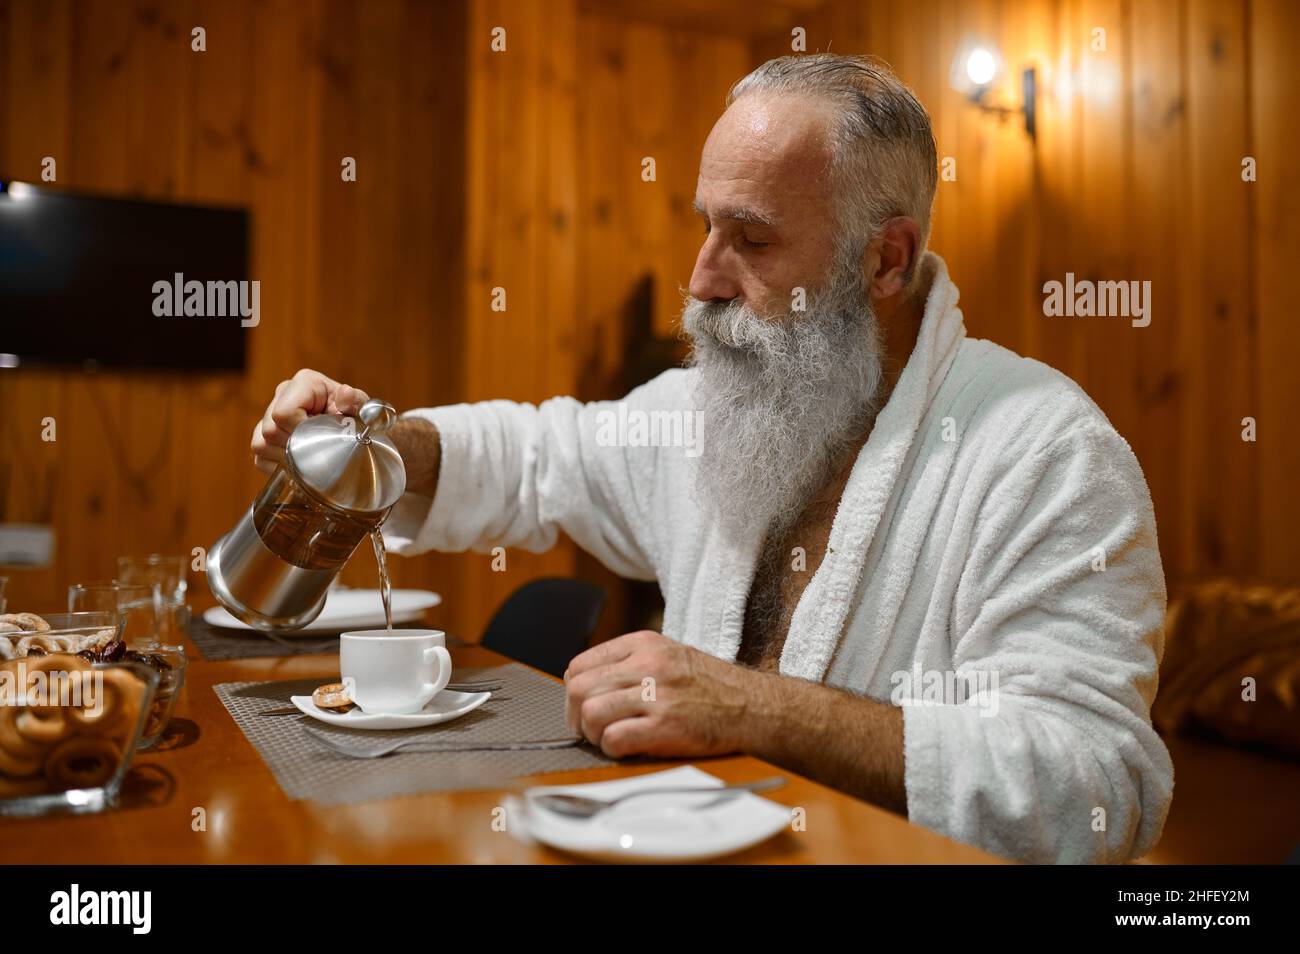 Man pouring tea during rest in sauna Stock Photo